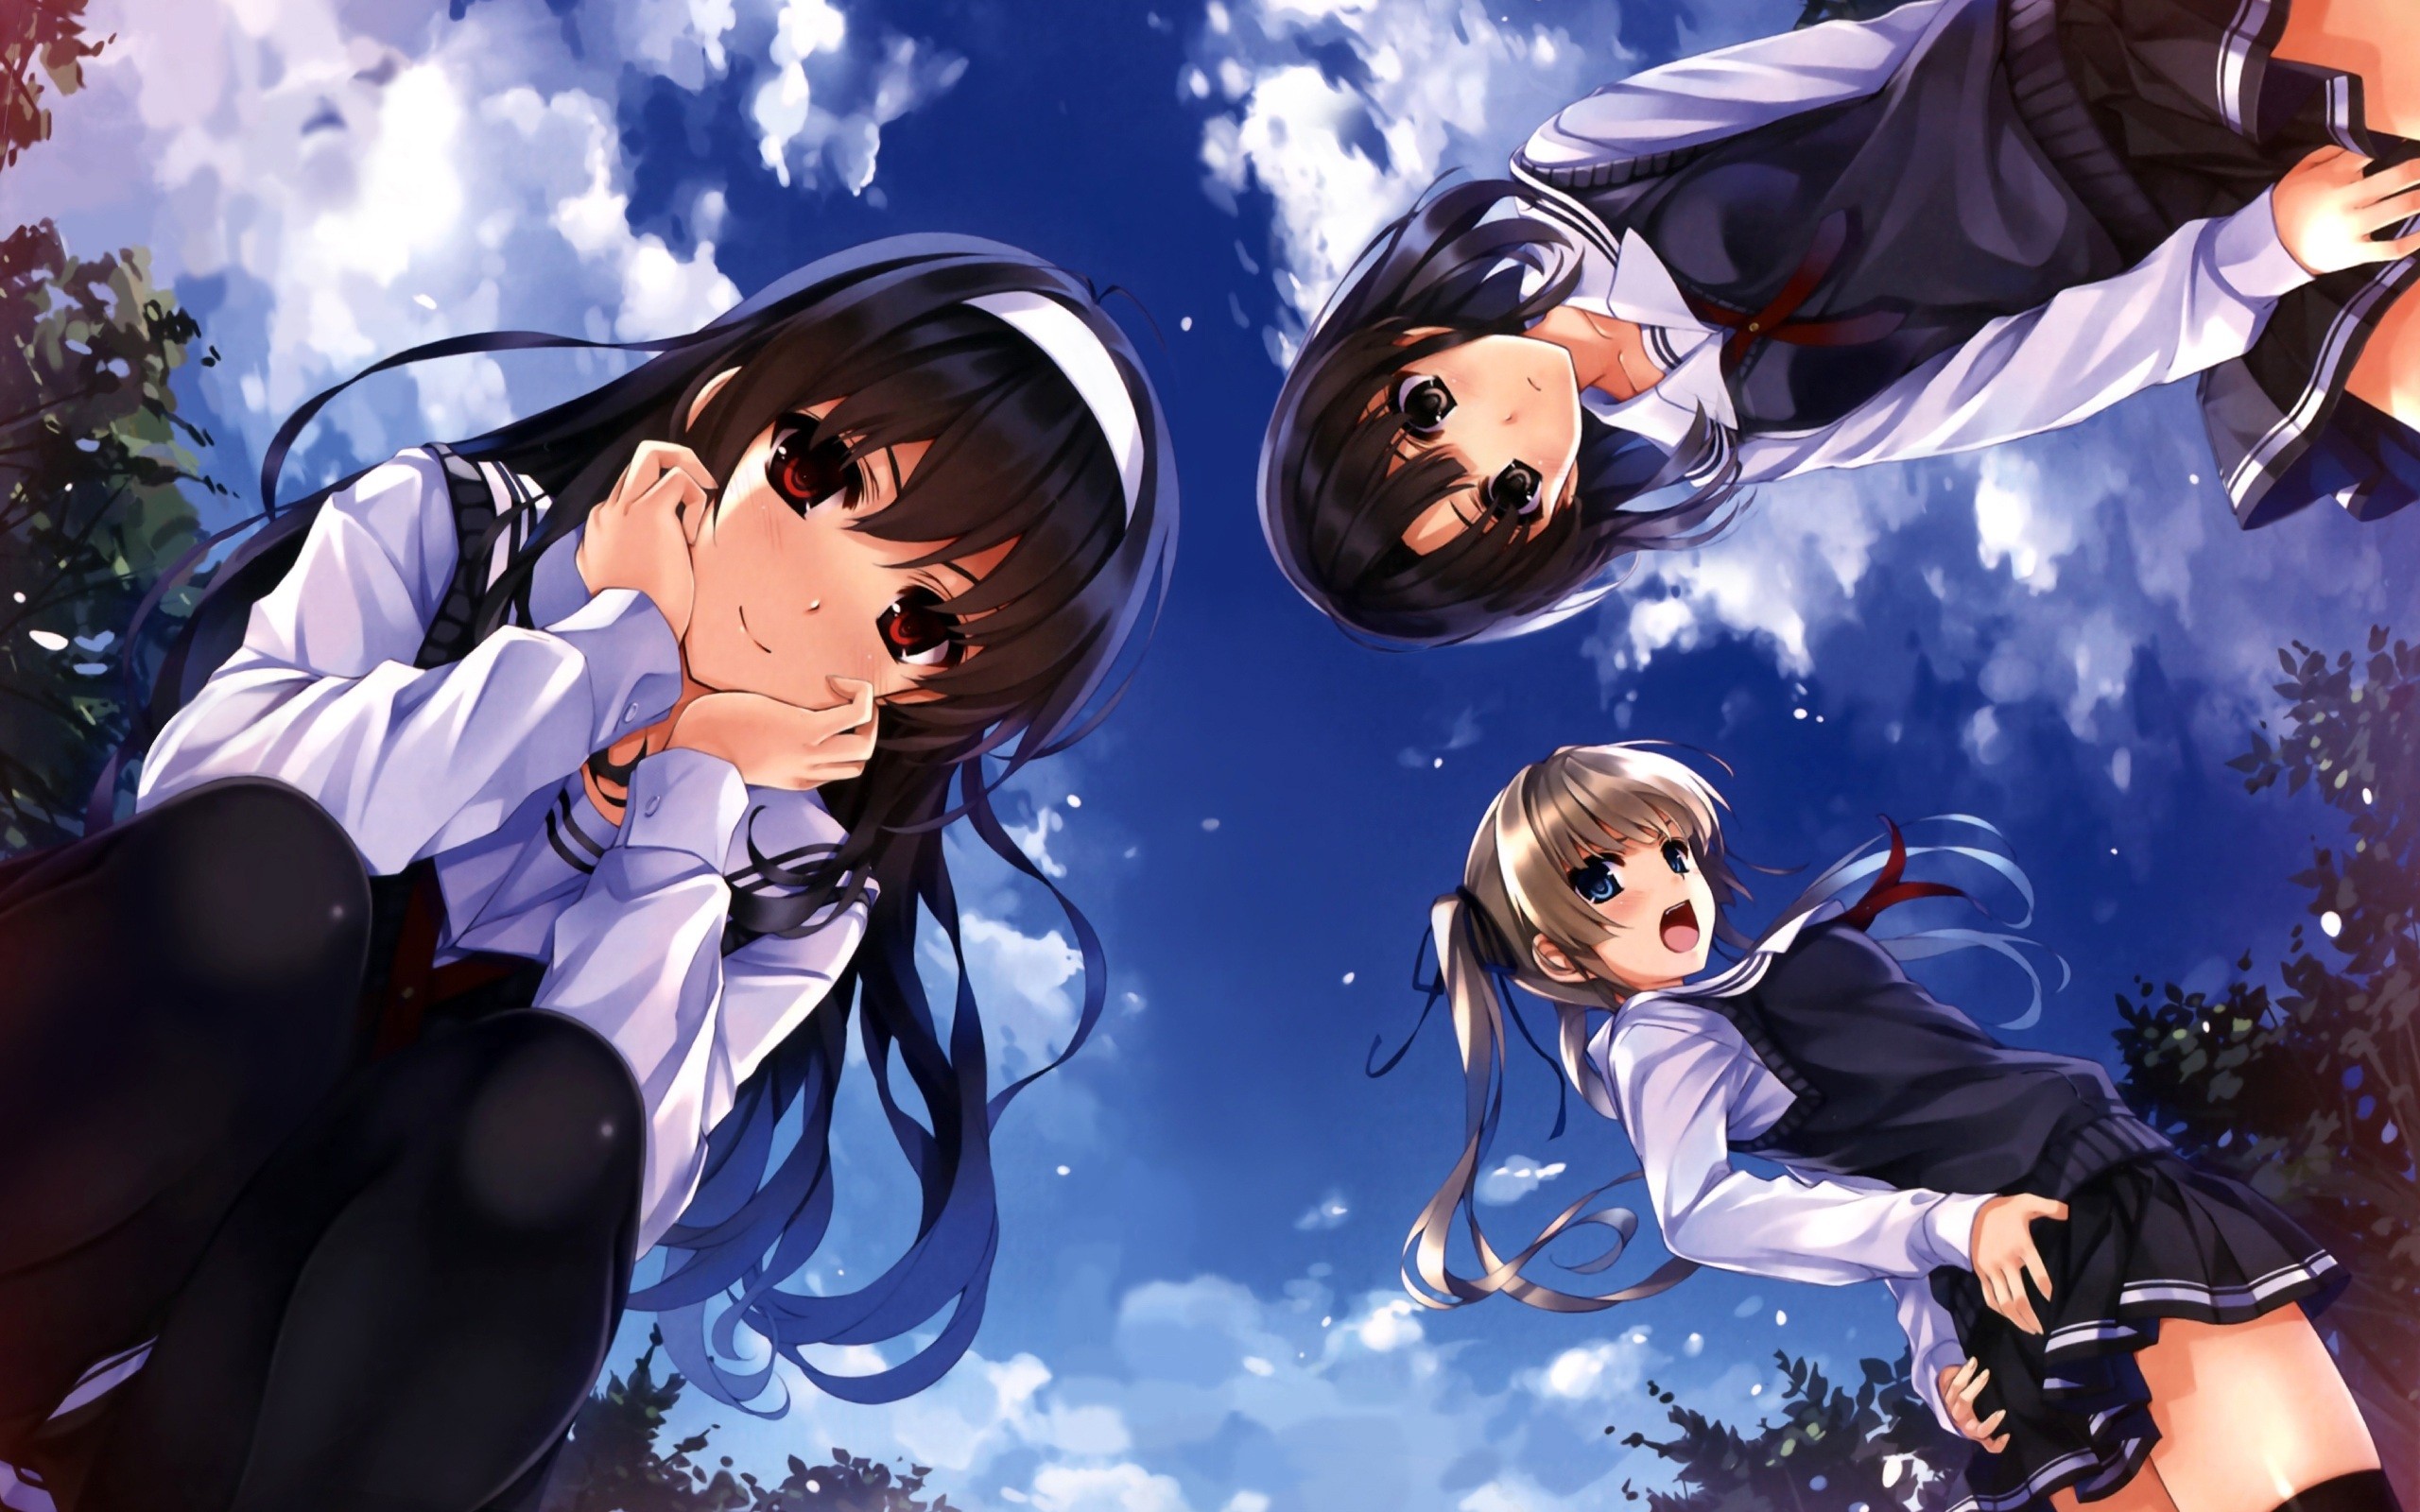 Outstanding Desktop Wallpapers Anime You Can Save It Free Of Charge